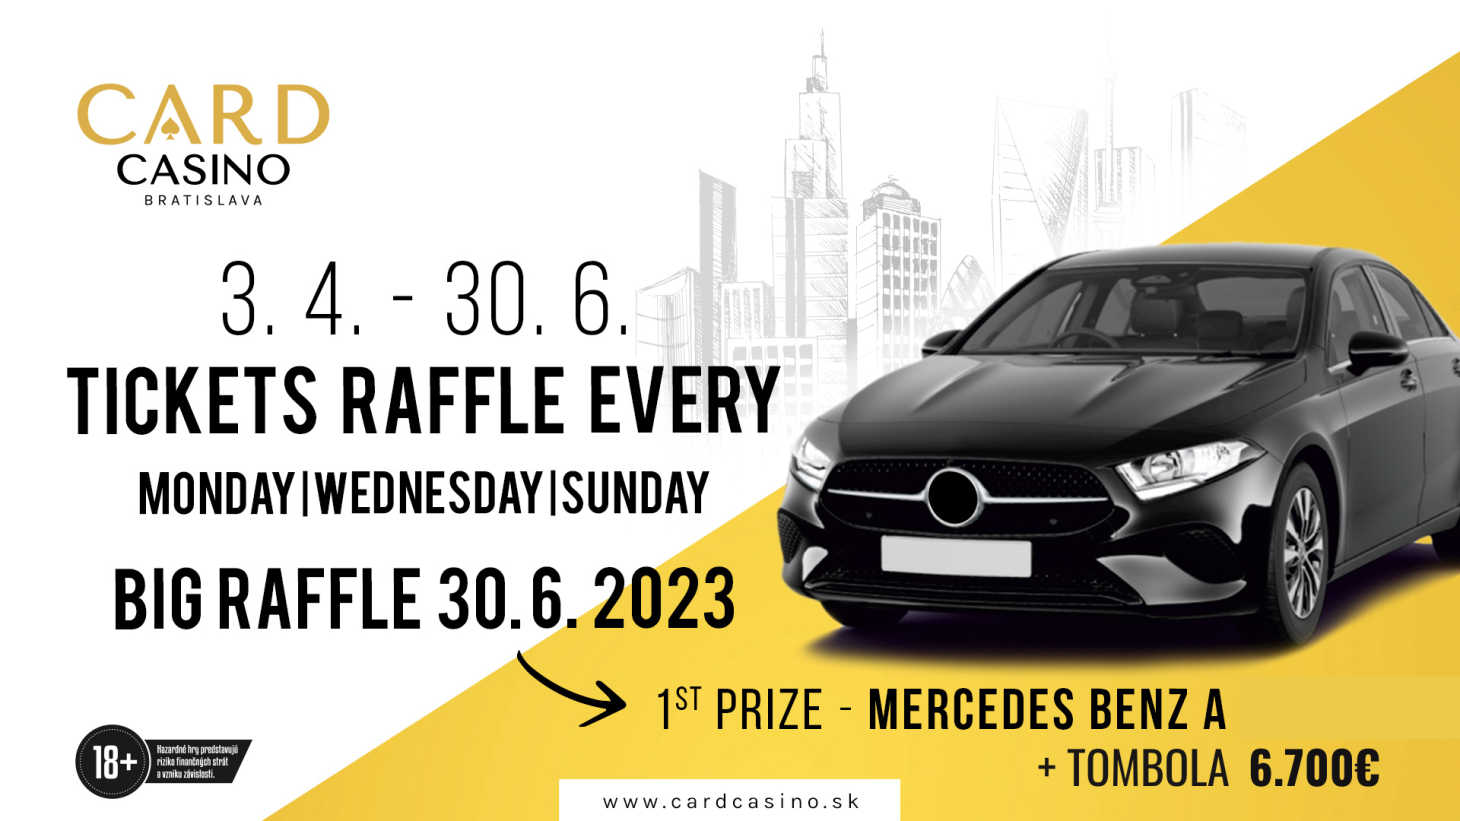 Win a brand new Mercedes in your Carde! How to do it?